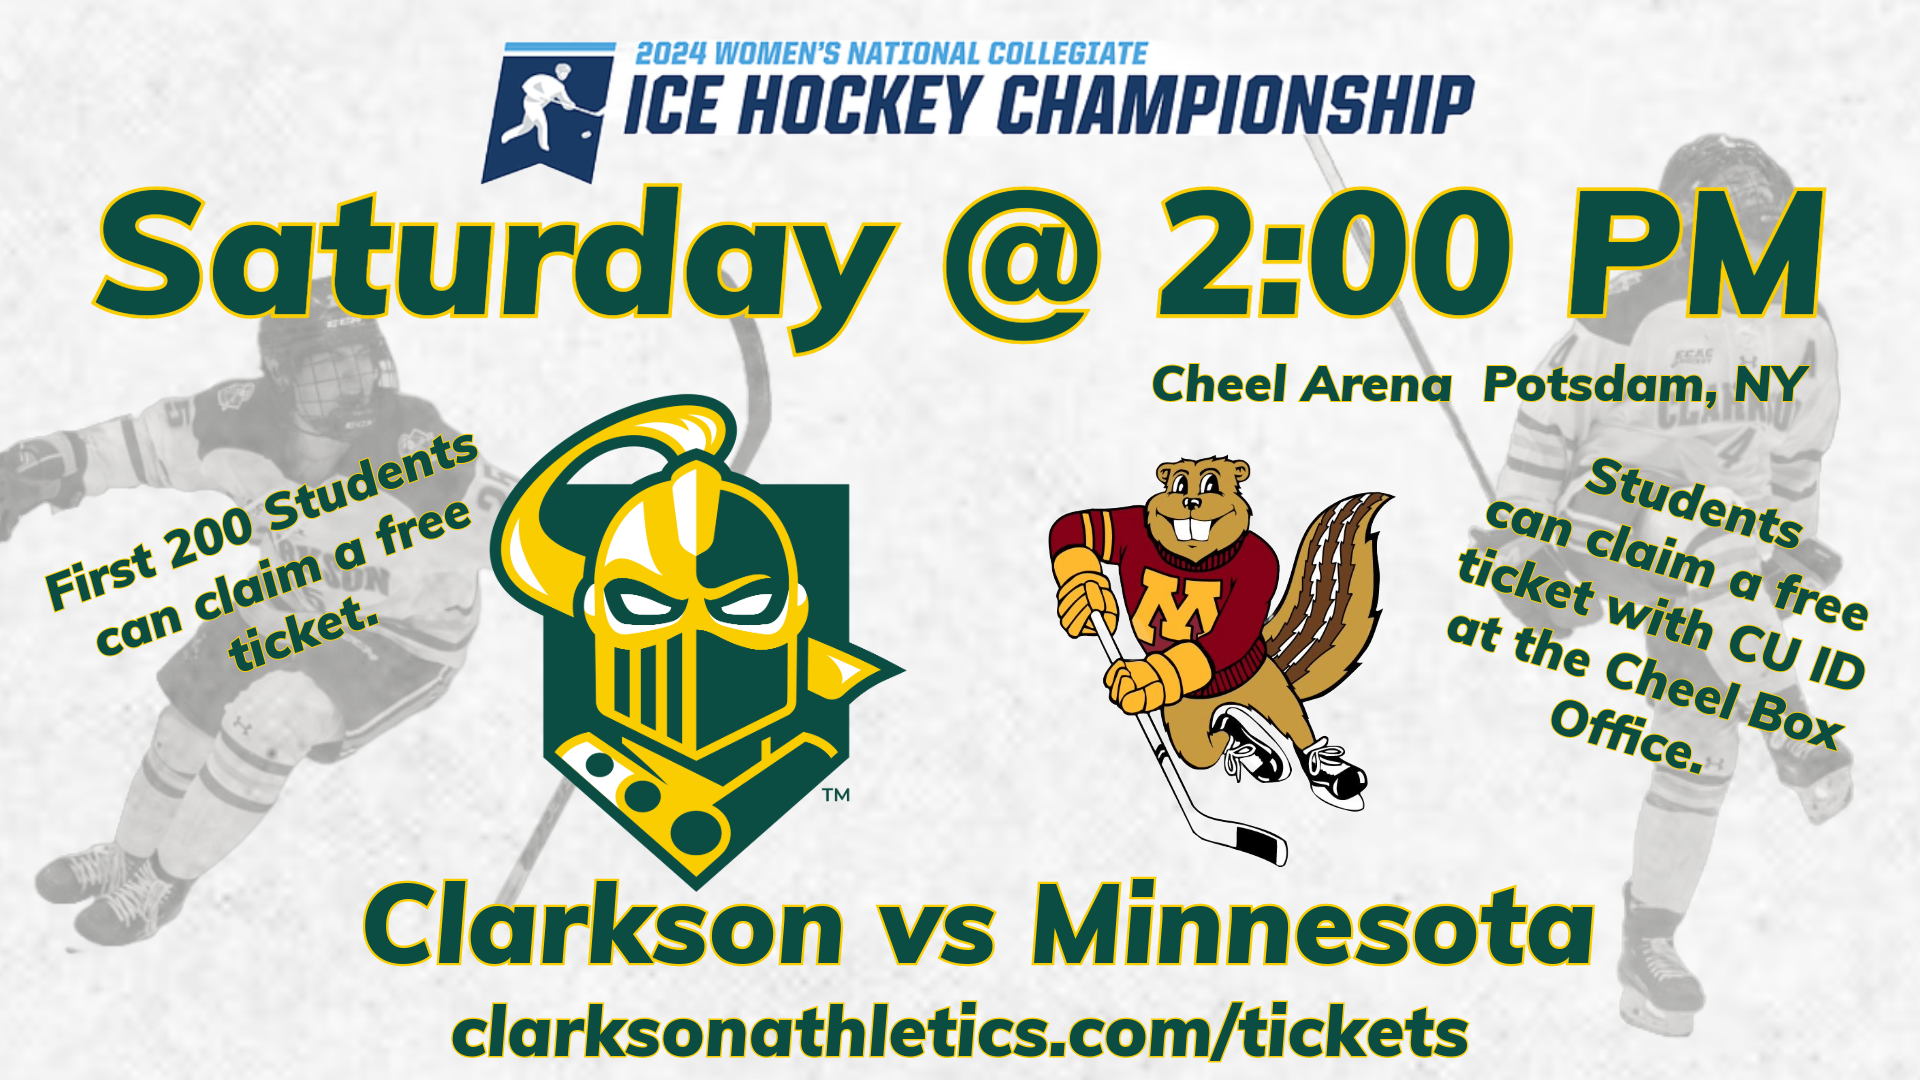 Hockey Graphic with players celebrating in the background, with the 2024 Women's National Collegiate Ice Hockey Championship logo at the top, under which reads Saturday @ 2:00 pm, along with the athletics logos for Clarkson and Minnesota with the names Clarkson and Minnesota underneath. Also included are "First 200 Students Get Free Tickets" and "To get your tickets please go to the Cheel Box office with a valid Clarkson ID"